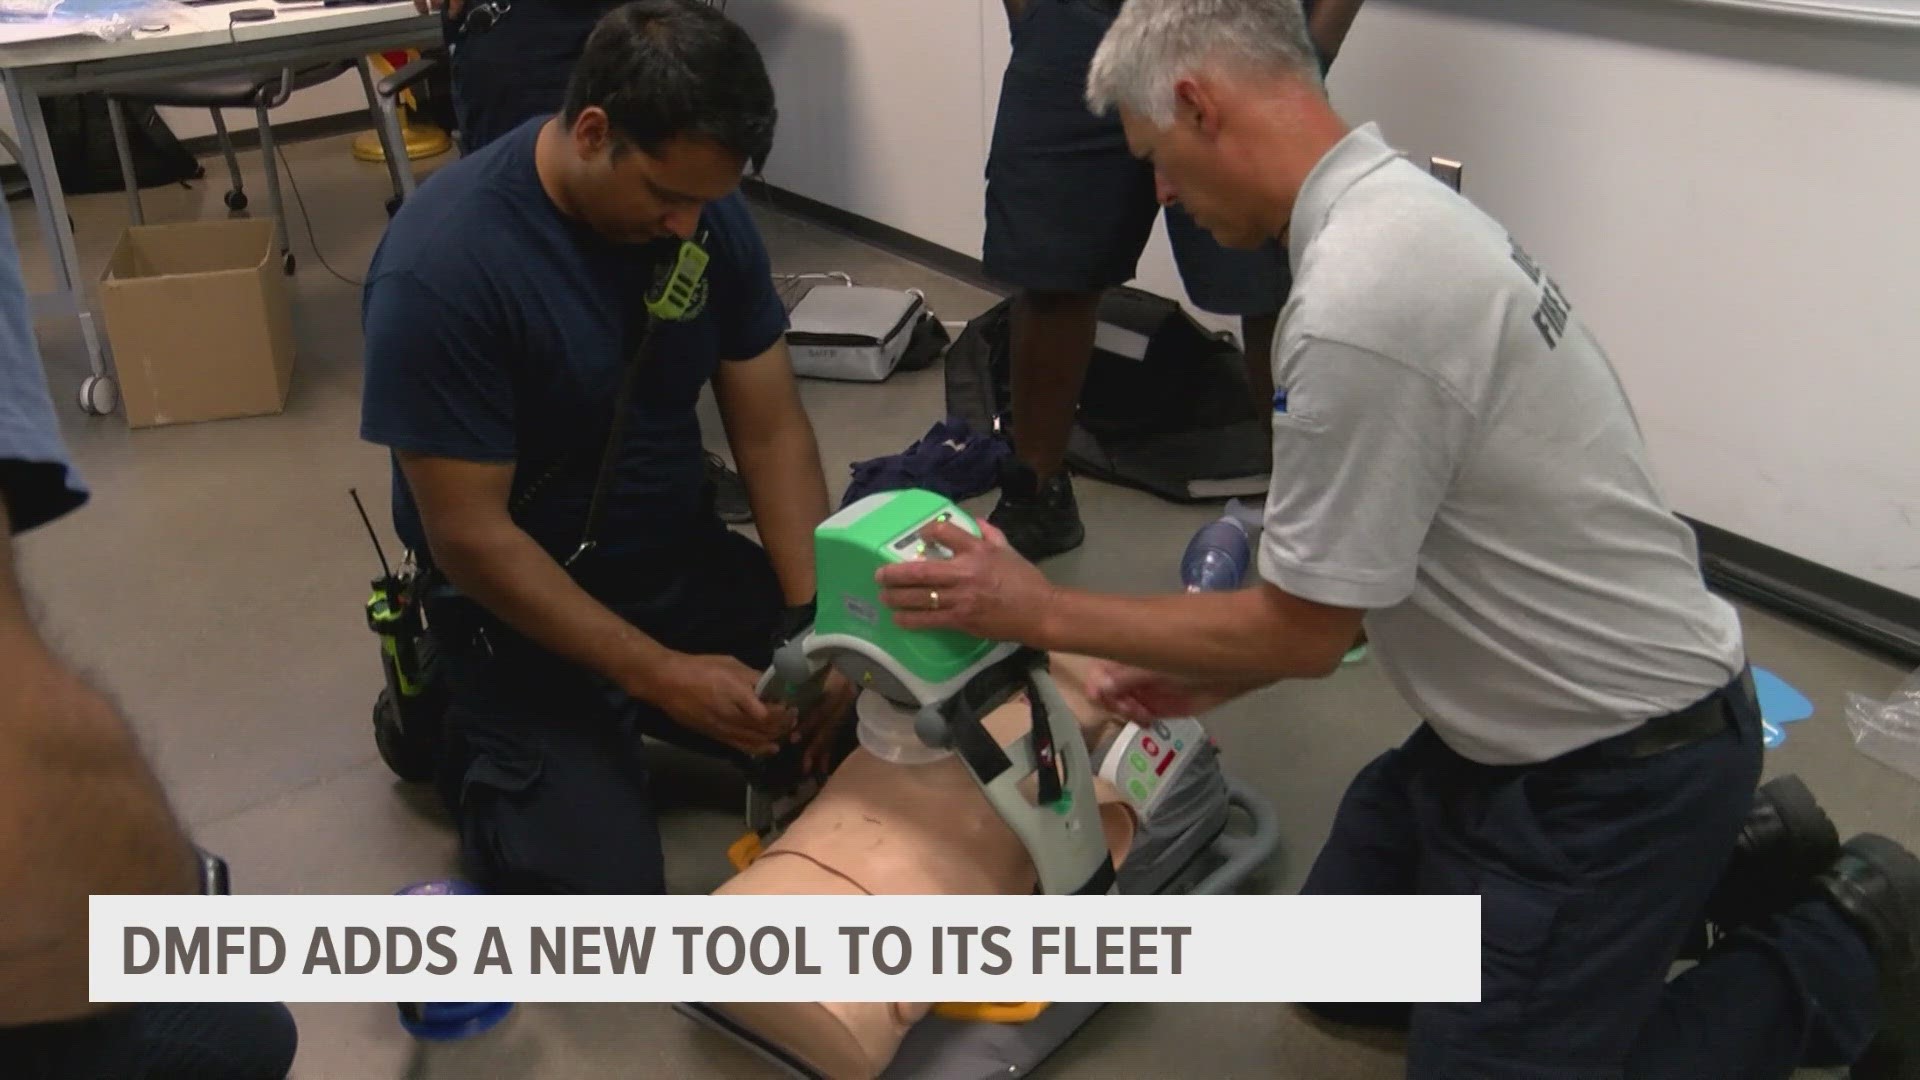 The EleGARD will work in tandem with a manual CPR pump and the LUCAS device. First responders say this trio of tools is a gamechanger in saving lives.